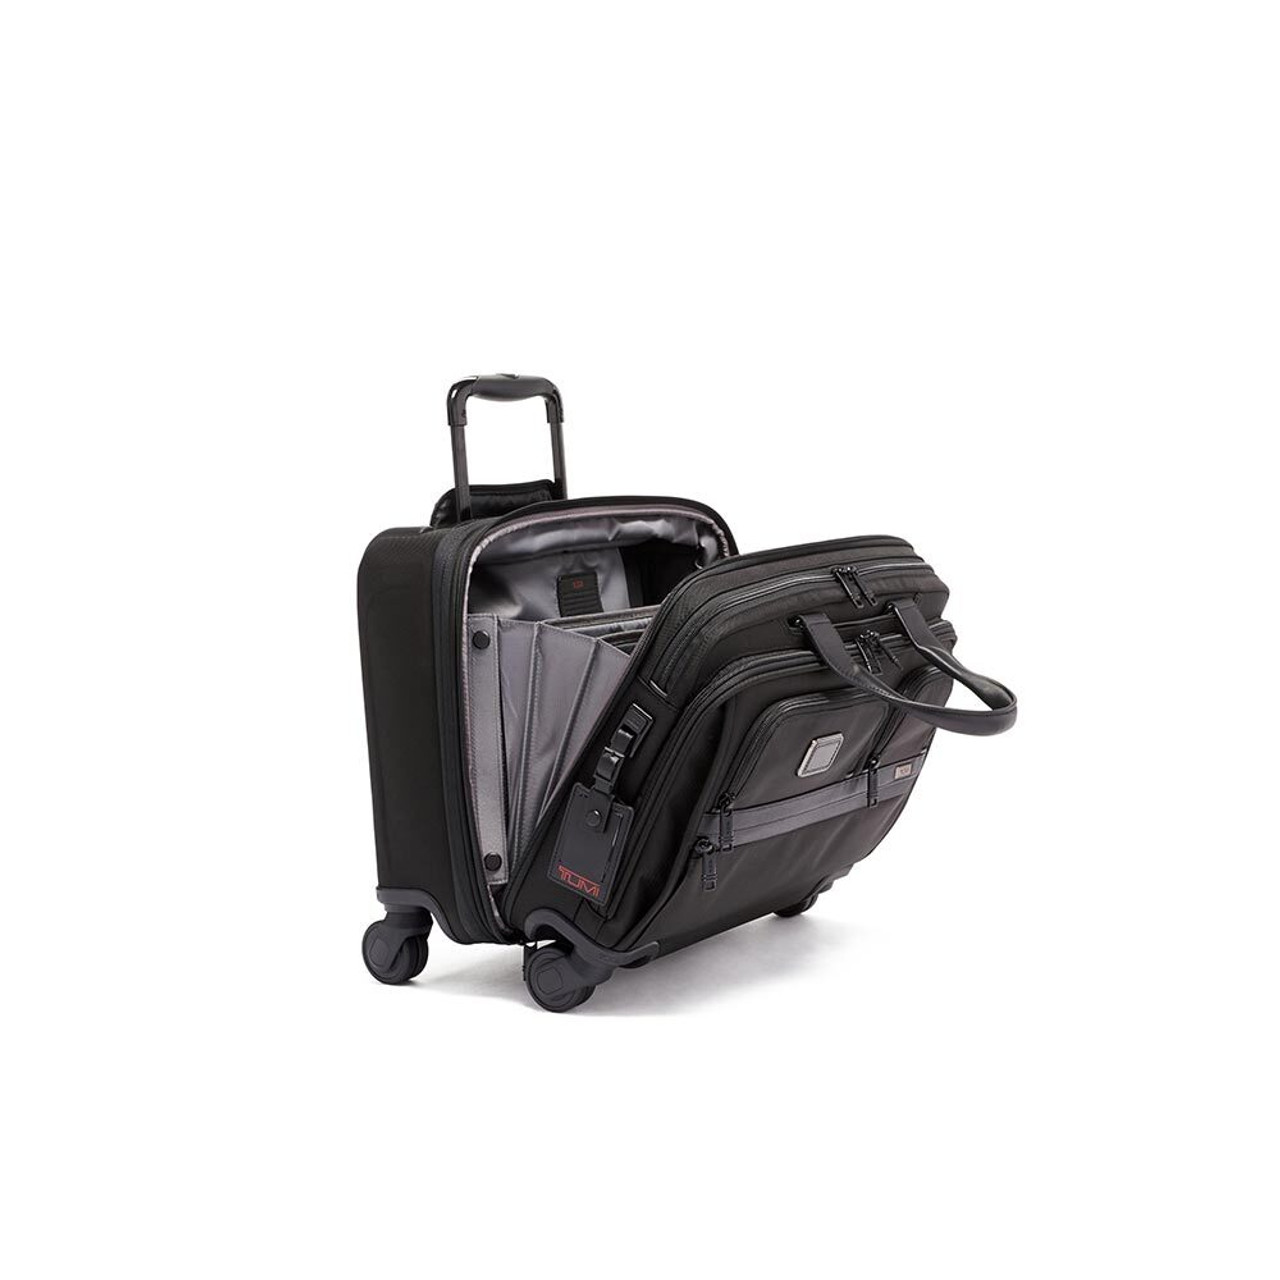 Deluxe 4 Wheeled Laptop Case Brief